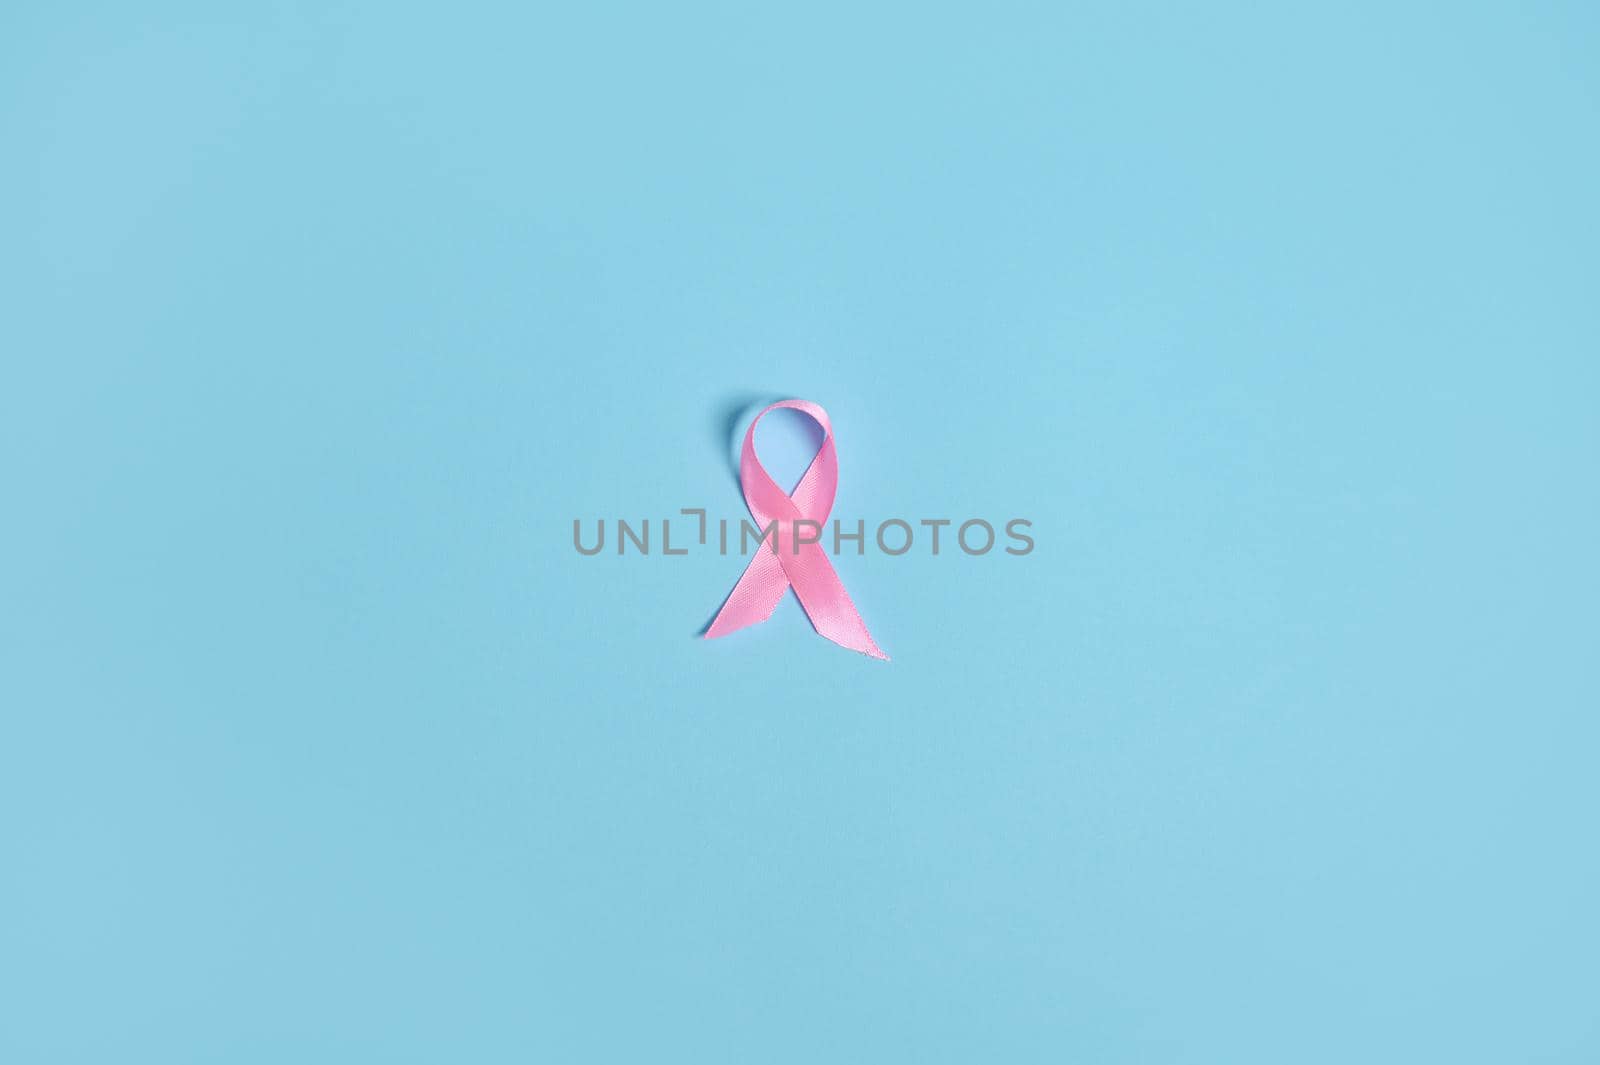 Flat lay of a satin pink ribbon awareness, International symbol of Breast Cancer Awareness Month in October. Isolated over on blue background with copy space .Women's health care and medical concept.